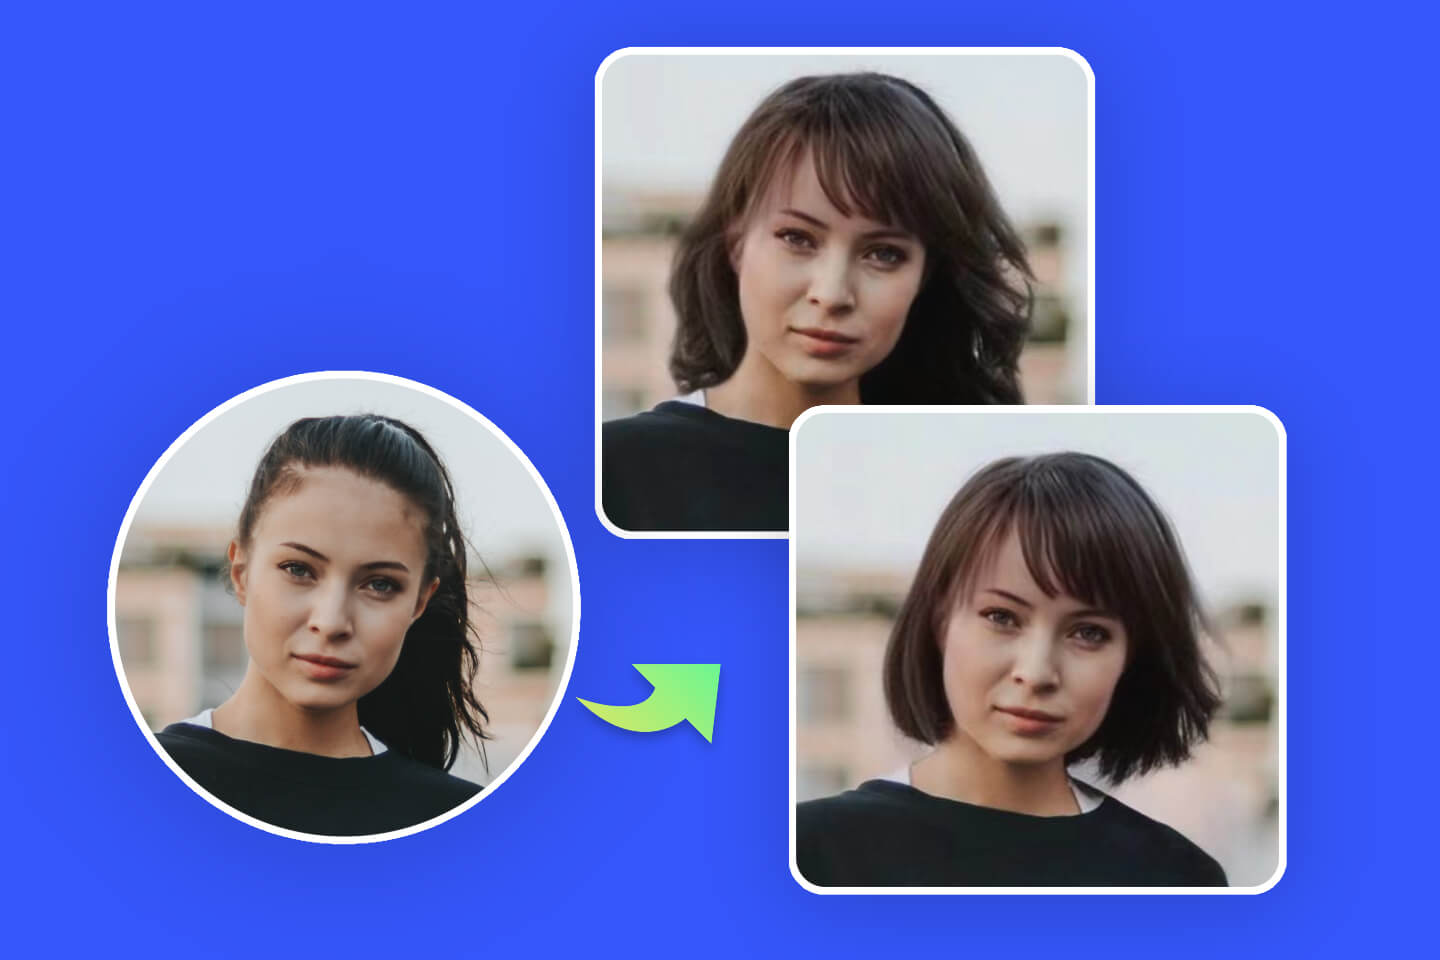 How to Build an Augmented Reality Hairstyles App?